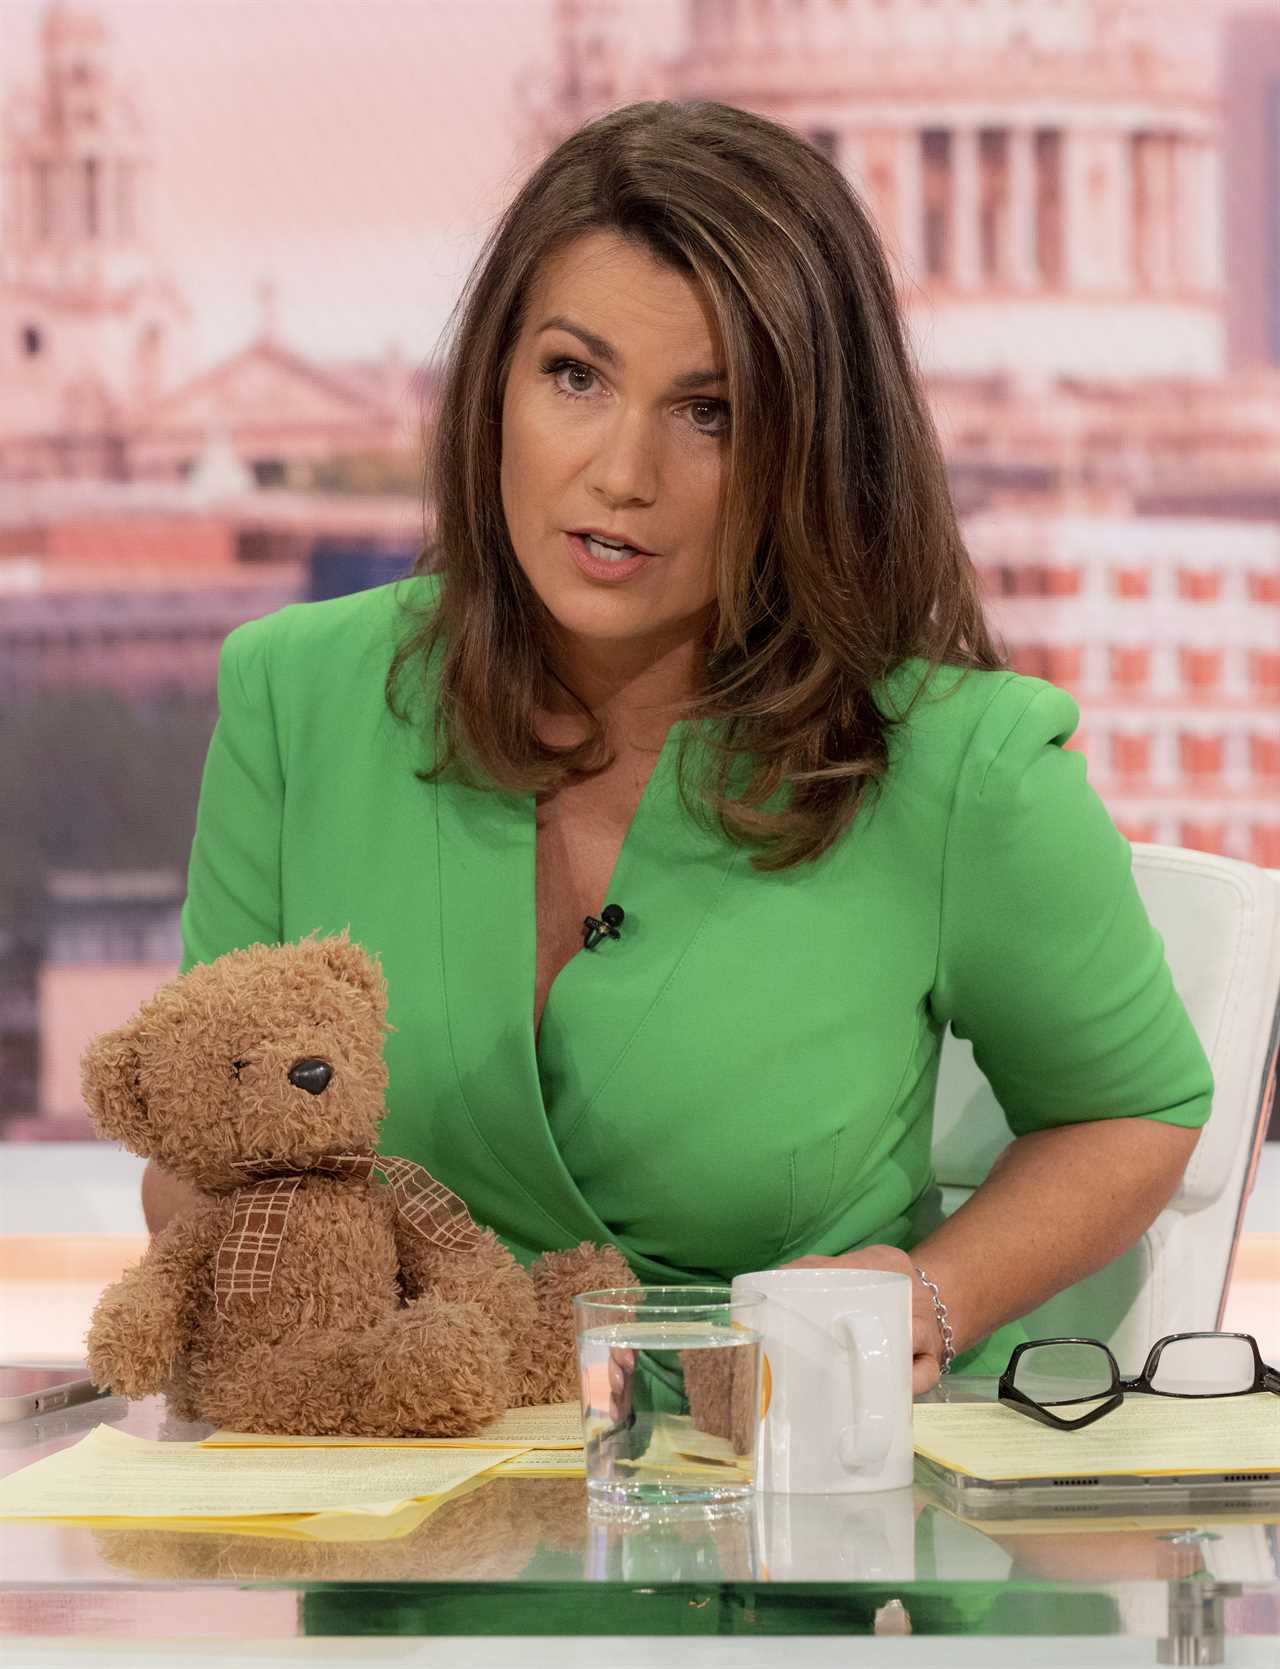 Good Morning Britain in presenter shake up as star ‘goes missing’ from show